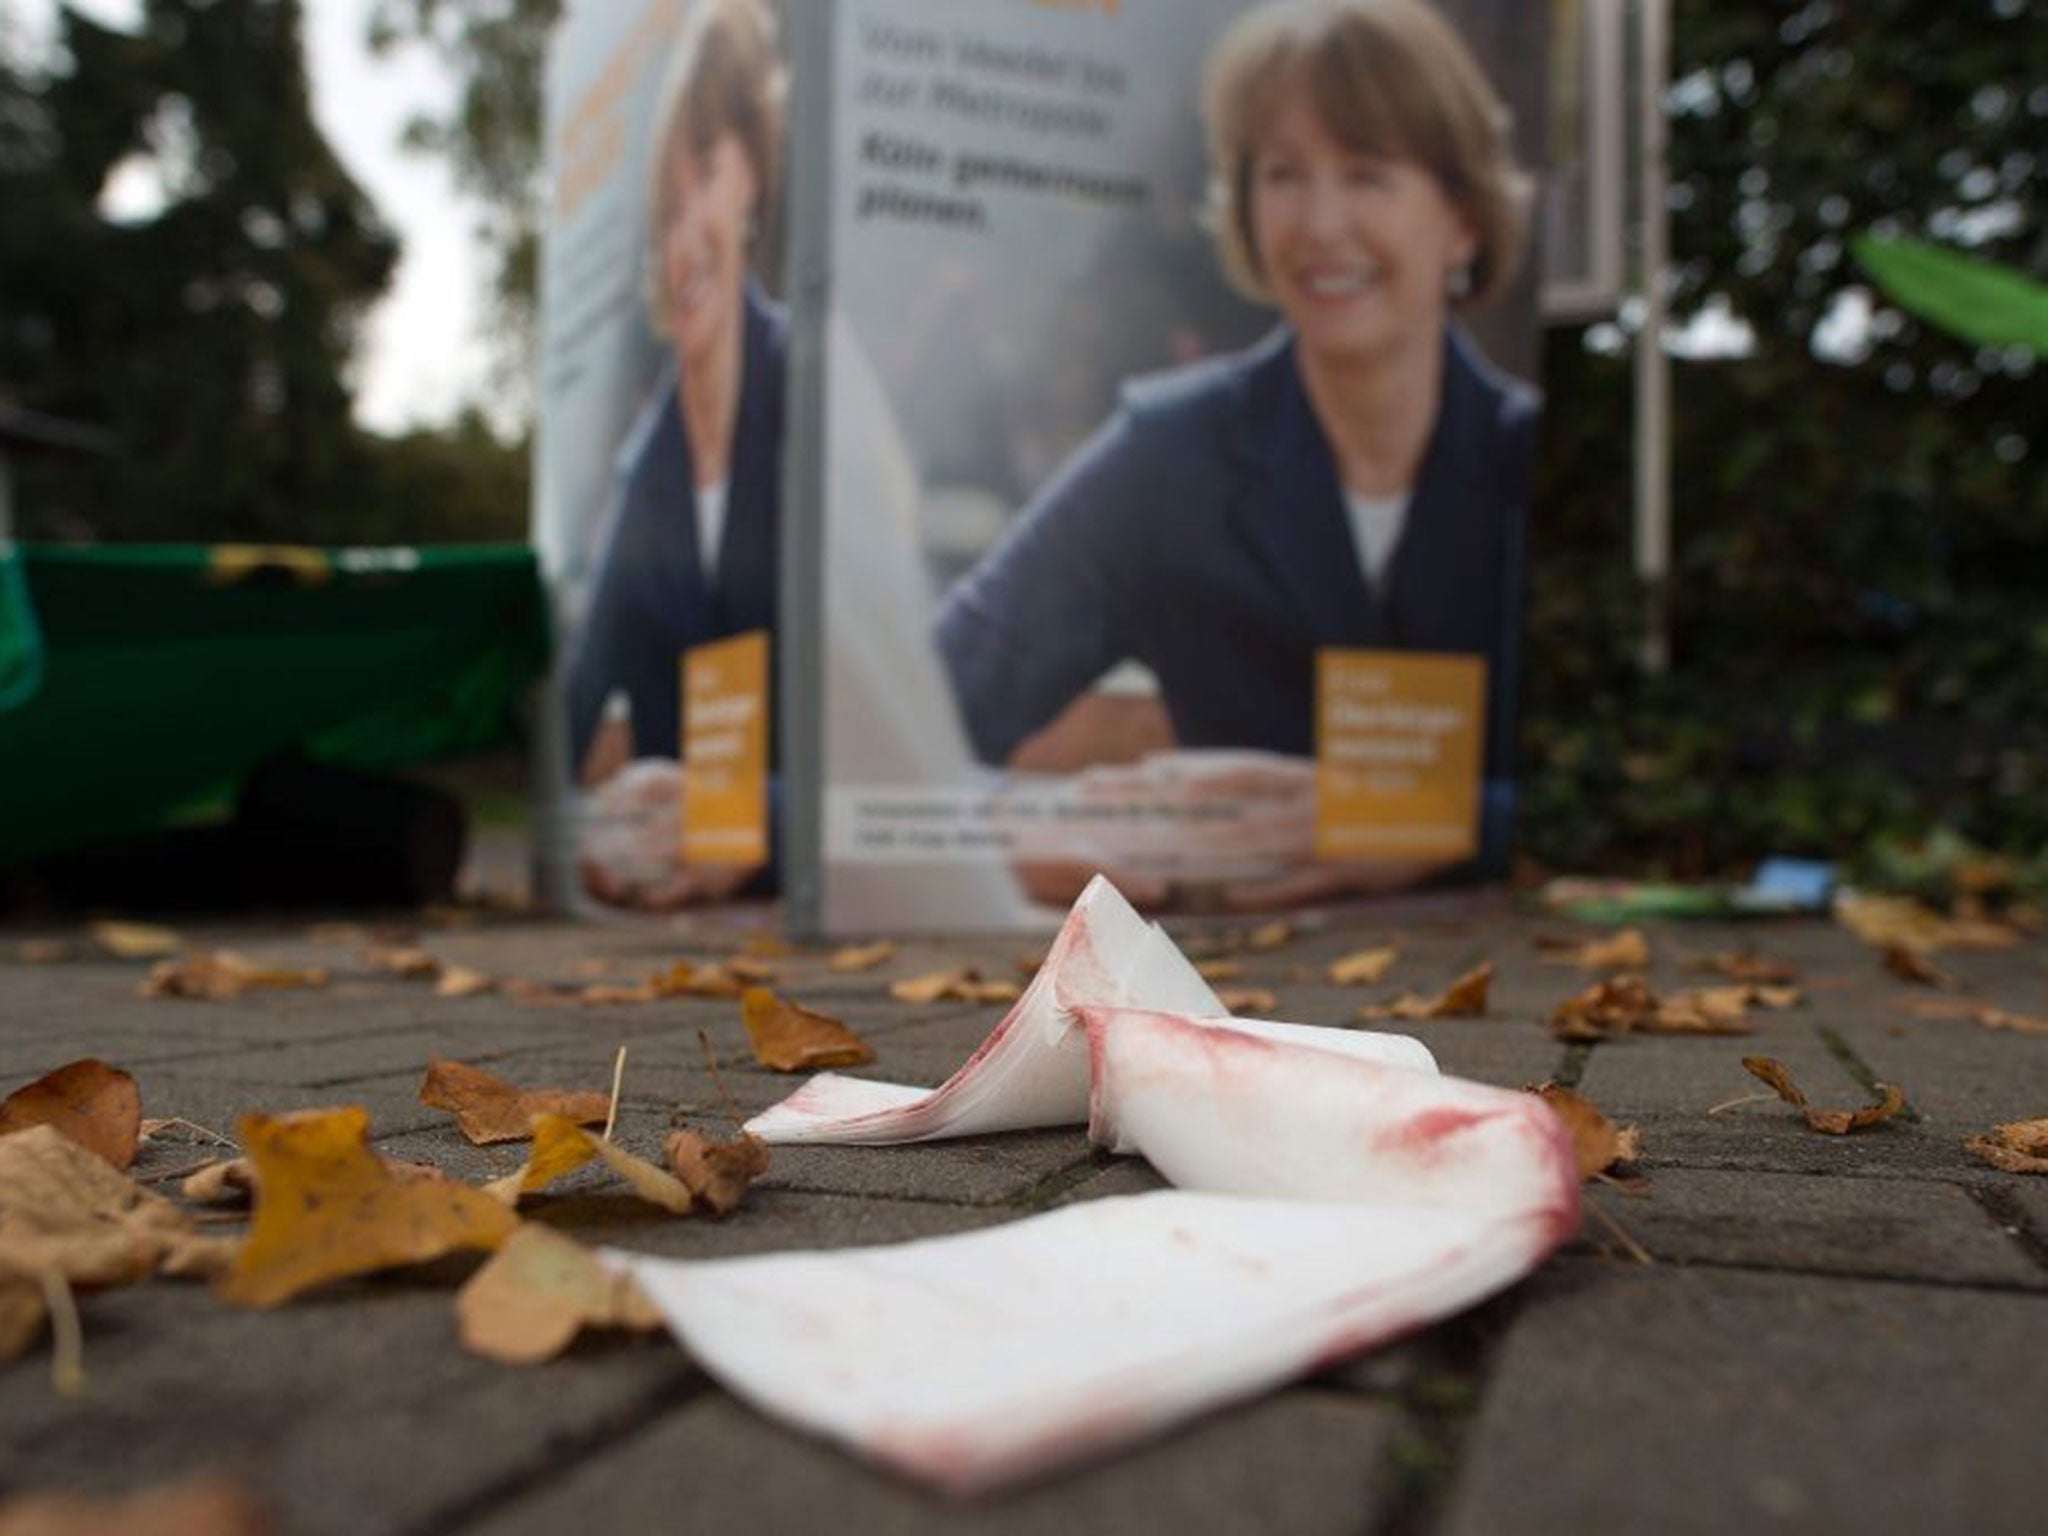 Used bandages material at the crime scene following a knife attack on mayoral candidate Henriette Reker in Cologne, Germany, 17 October 2015.